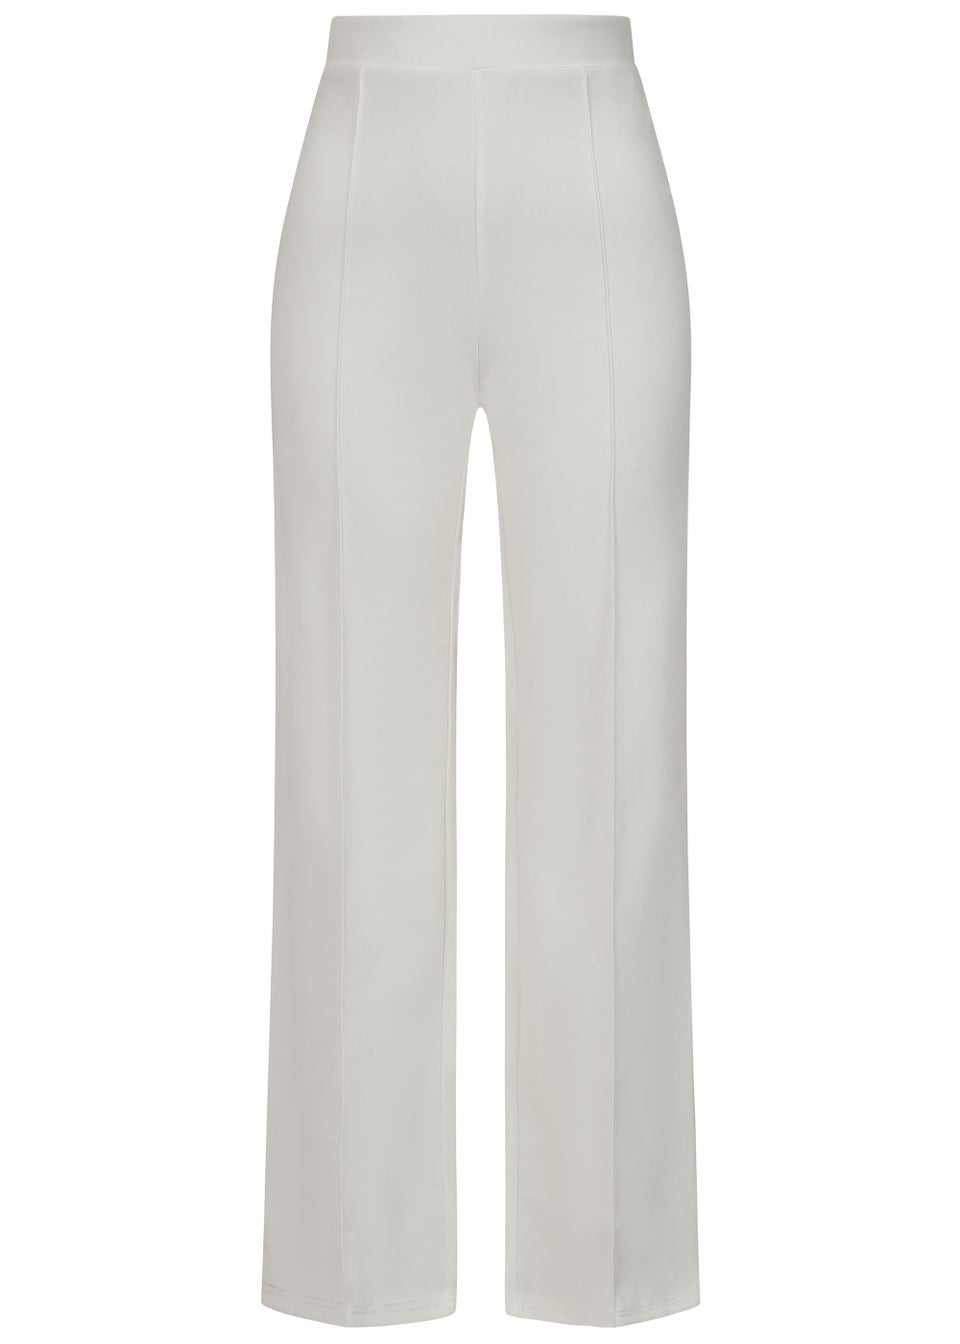 Girls on Film by Dani Dyer Ivory Wide Leg Co-Ord Trousers - Matalan